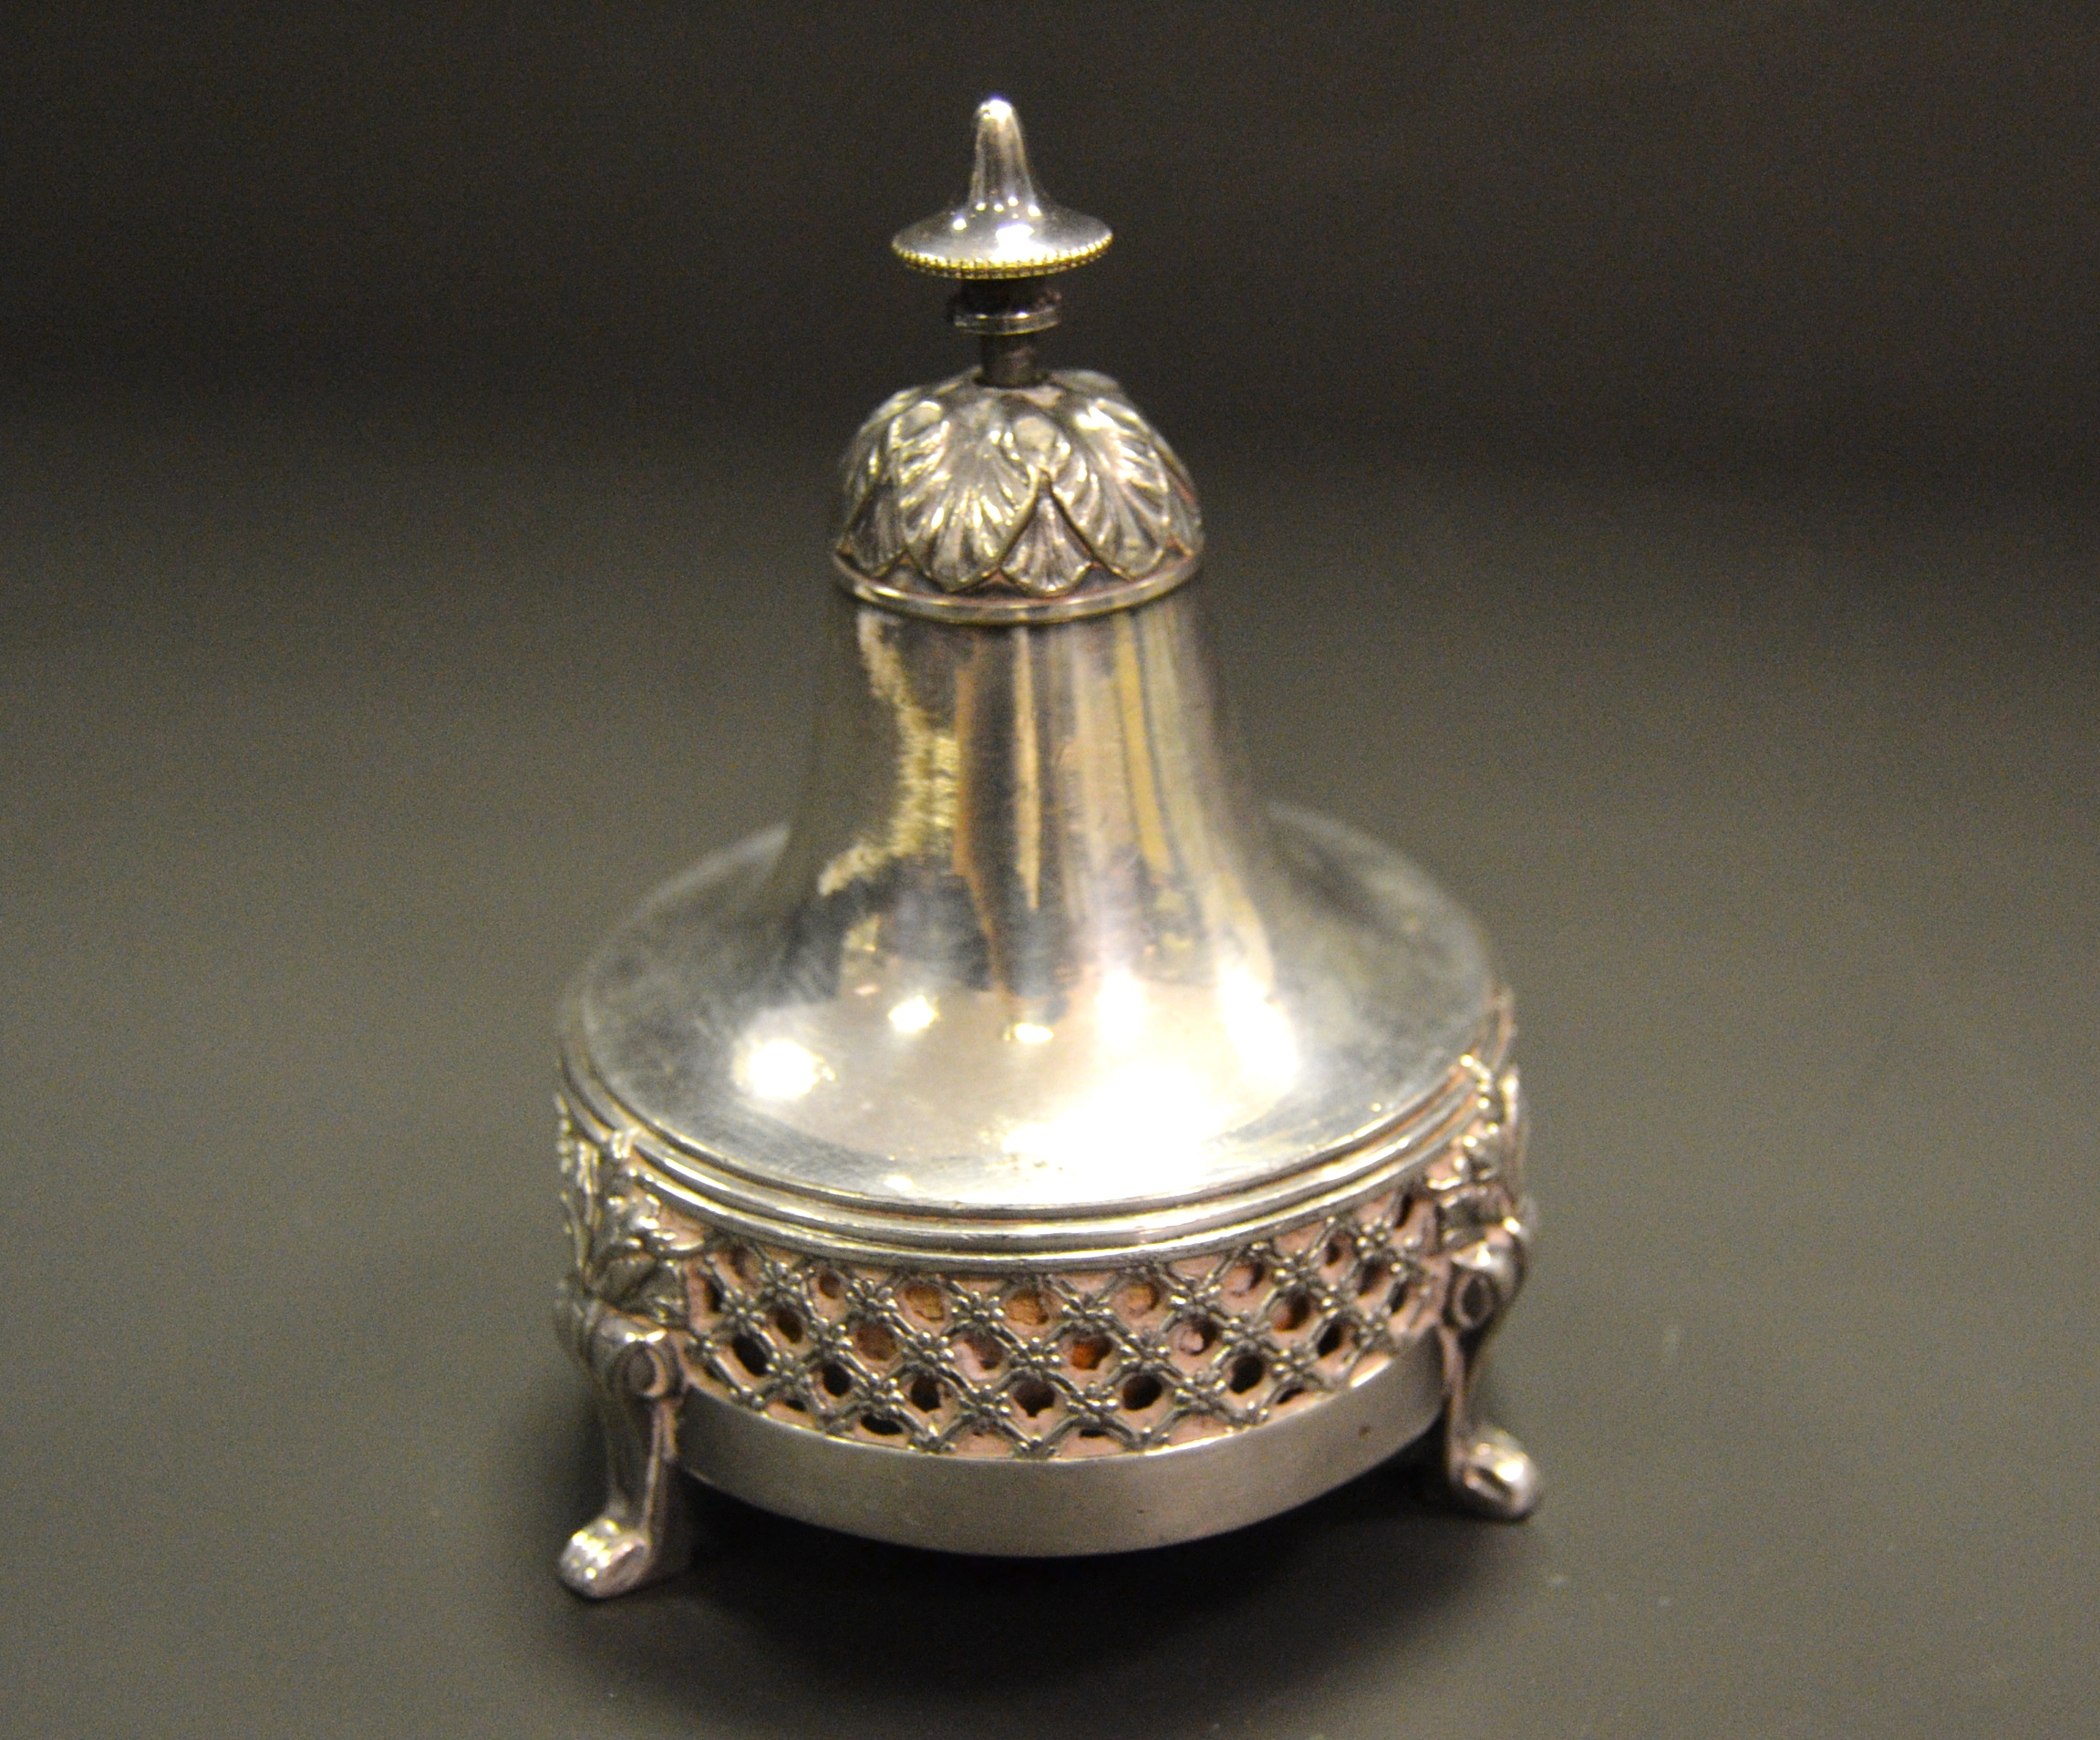 A WMF silver plated desk or counter bell